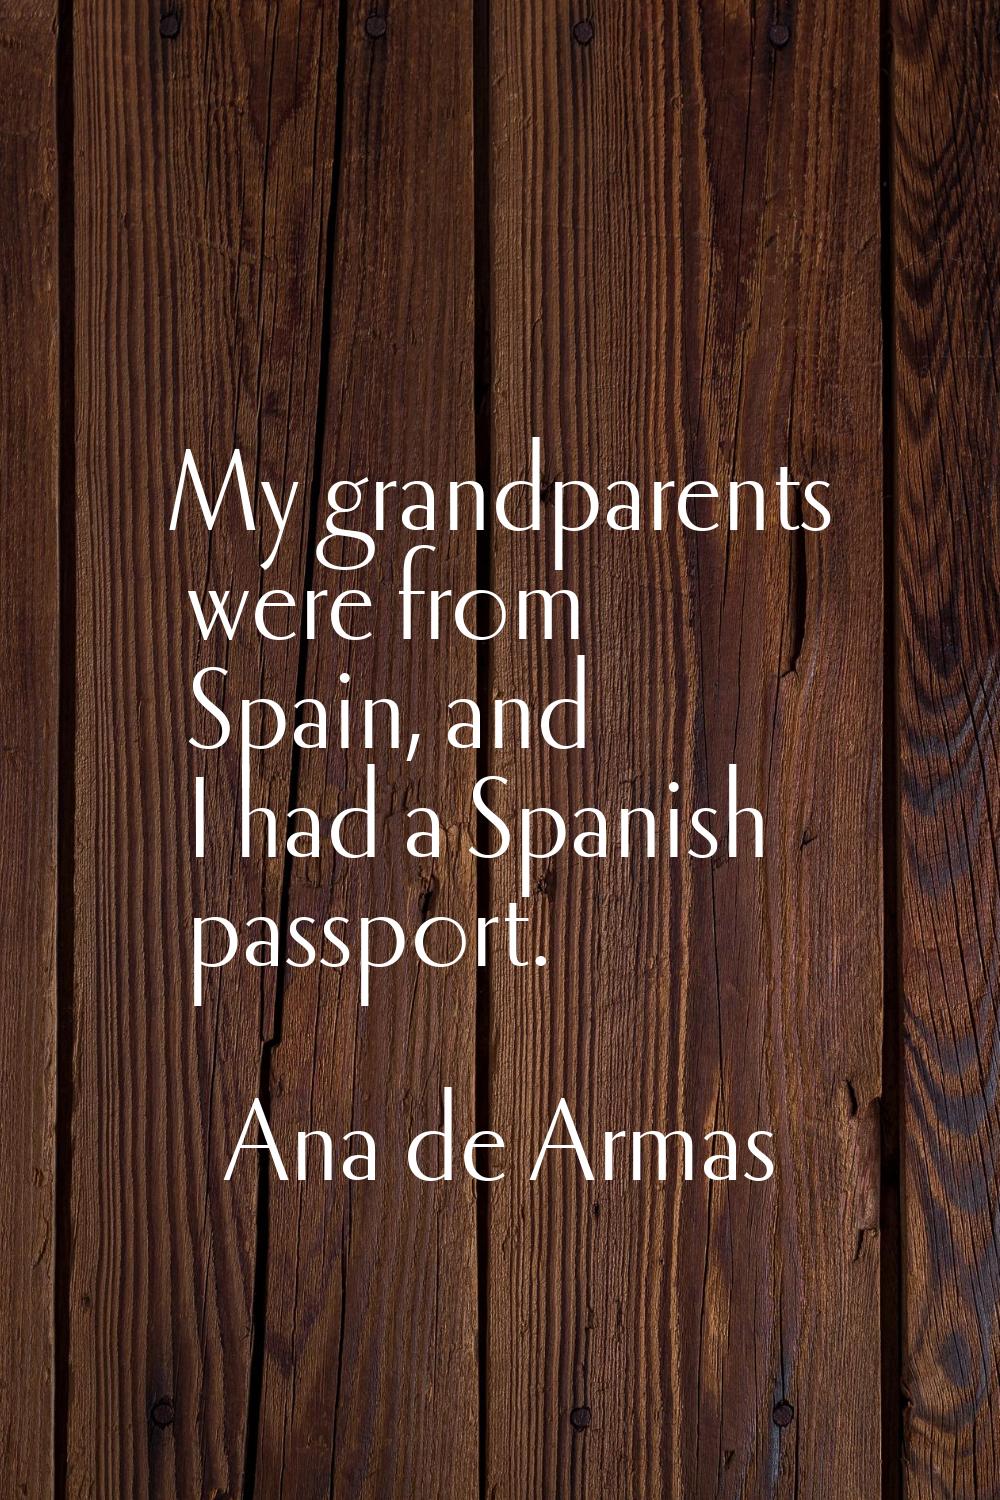 My grandparents were from Spain, and I had a Spanish passport.